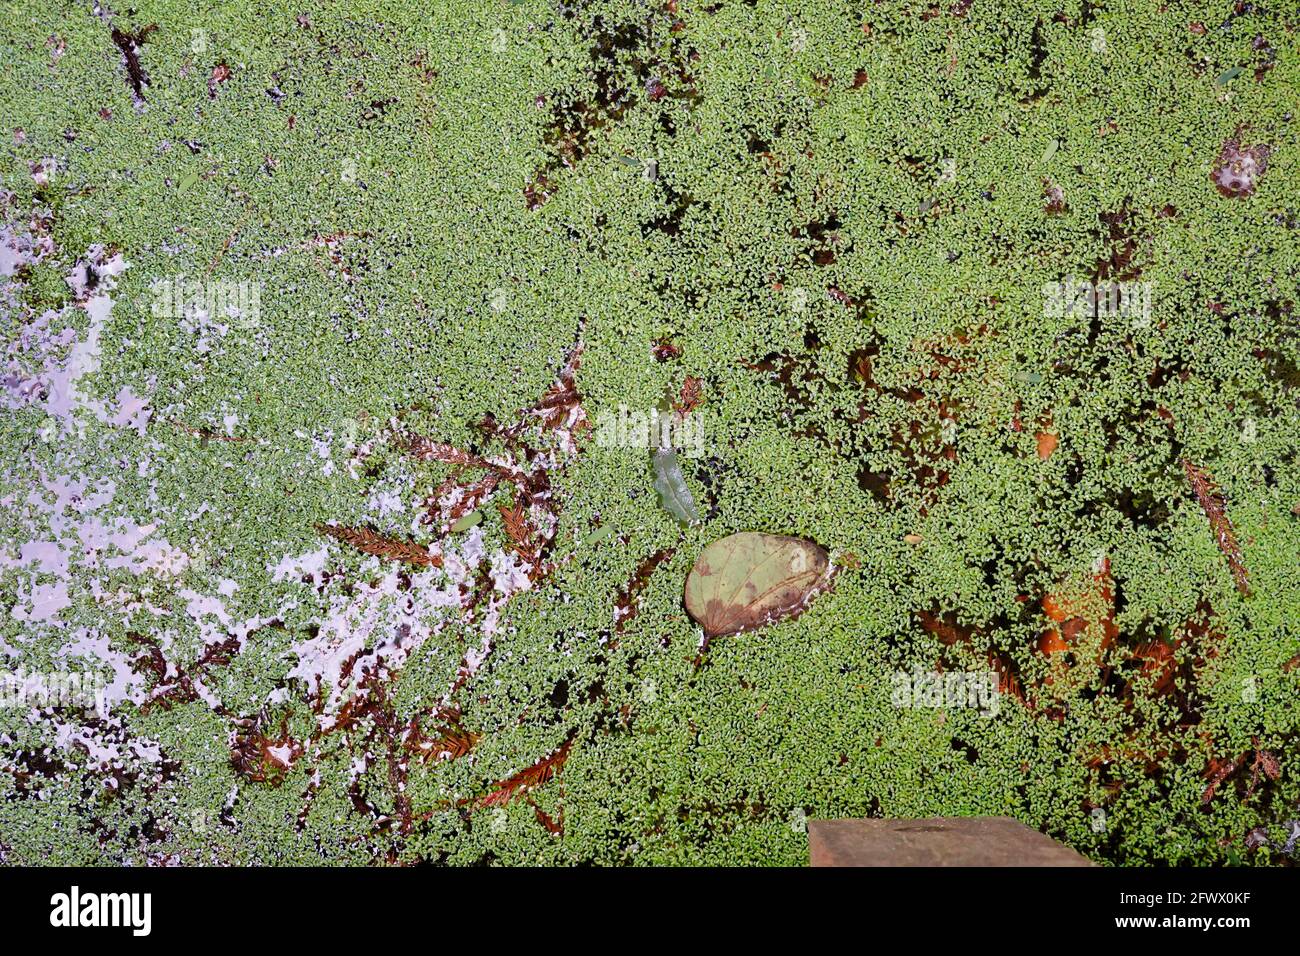 Top view of duckweeds on a water surface Stock Photo